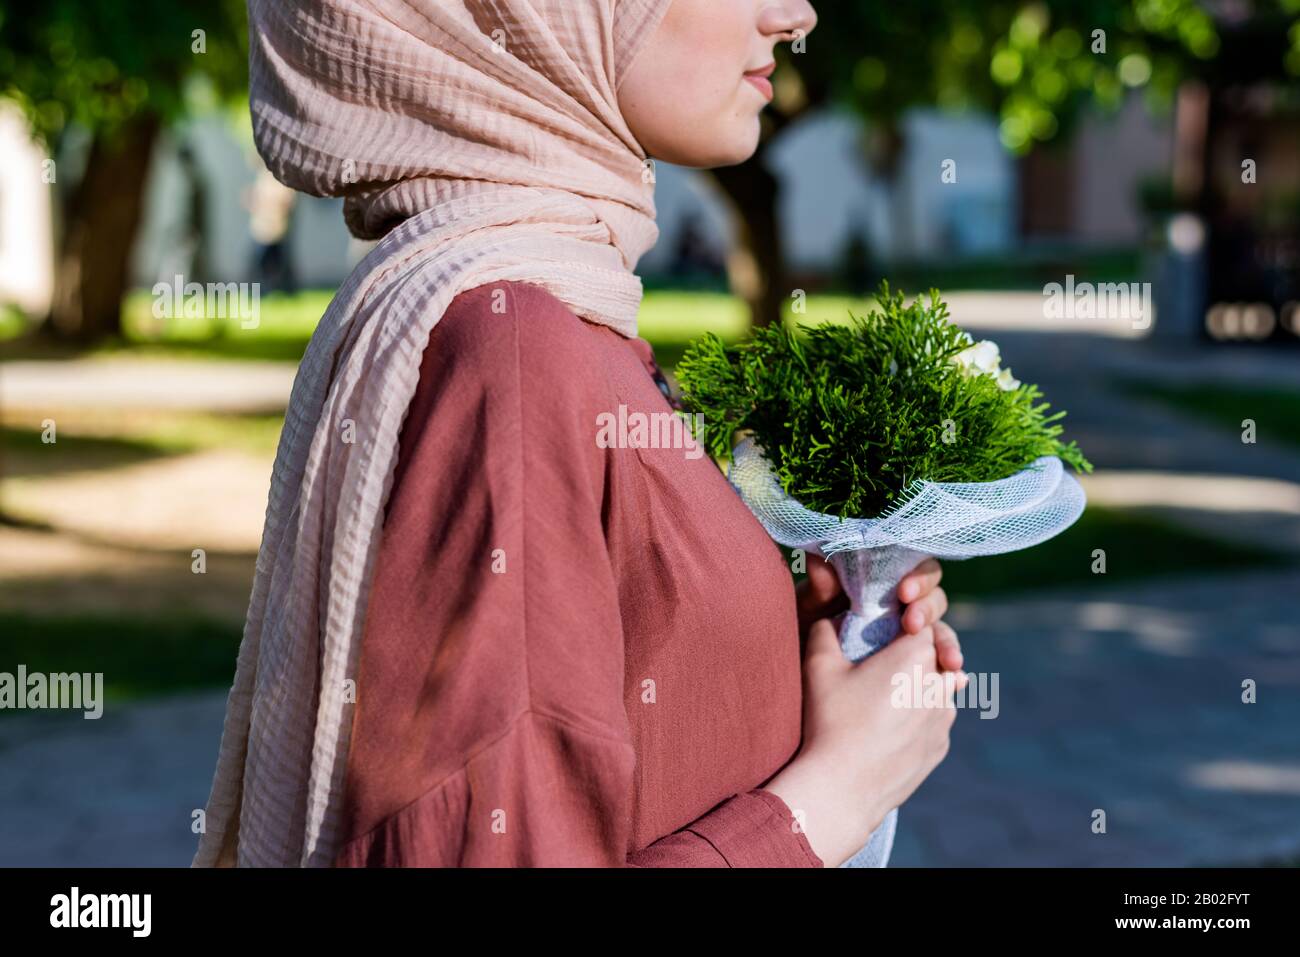 Woman in hijab graceful holding bouquet of green flowers Stock Photo